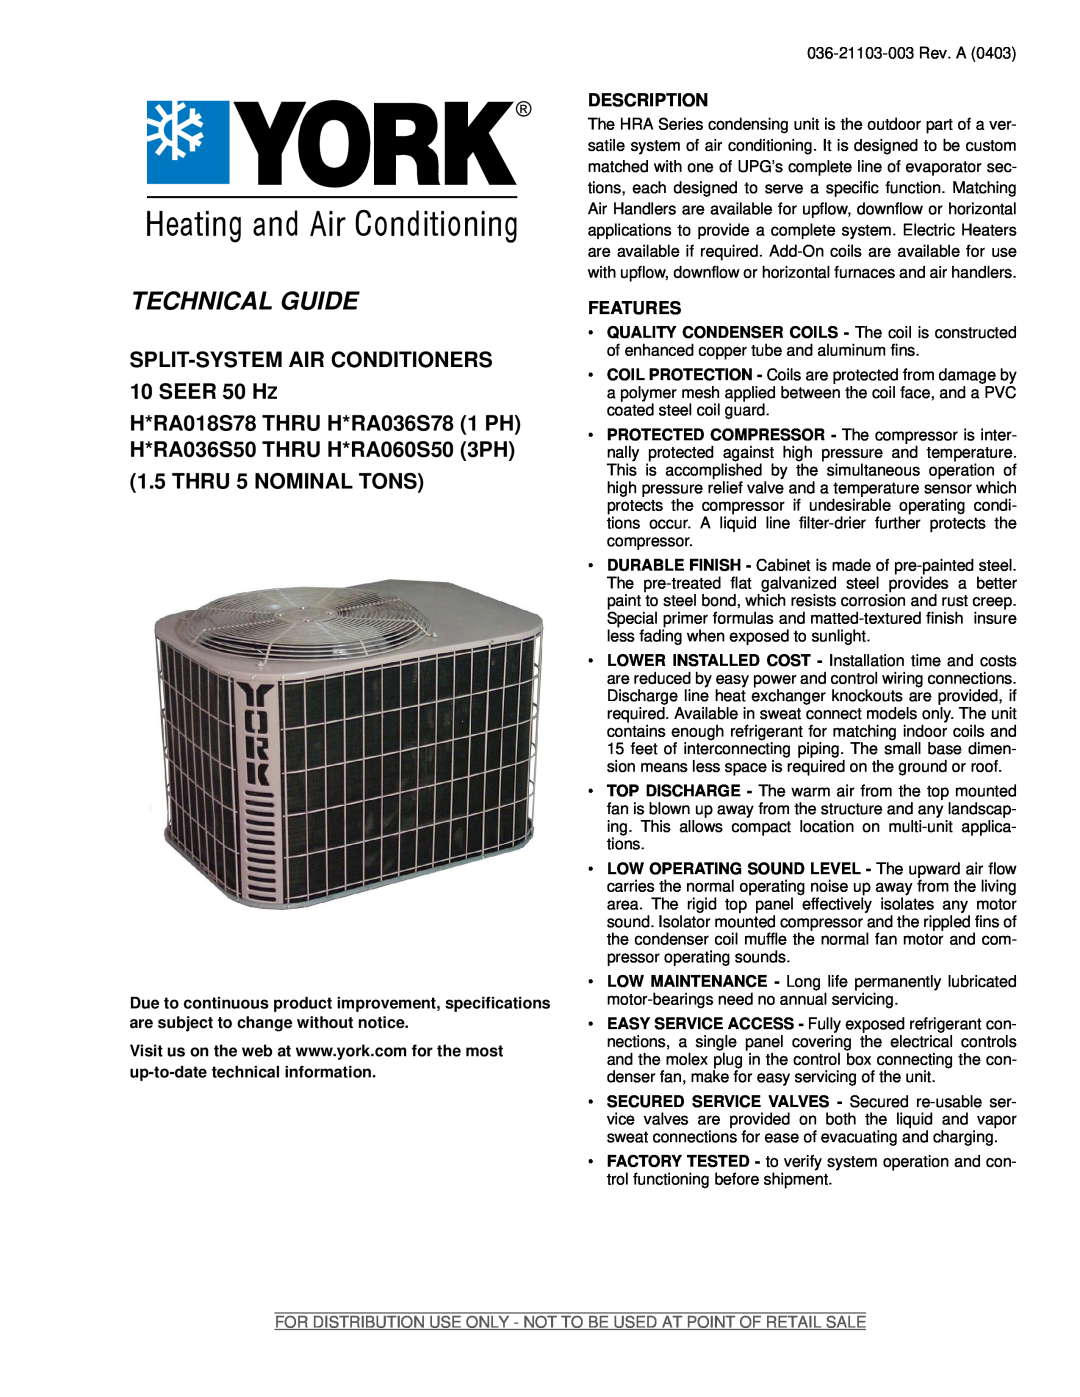 York 036-21103-003 specifications Description, Features, Technical Guide, SPLIT-SYSTEMAIR CONDITIONERS 10 SEER 50 HZ 